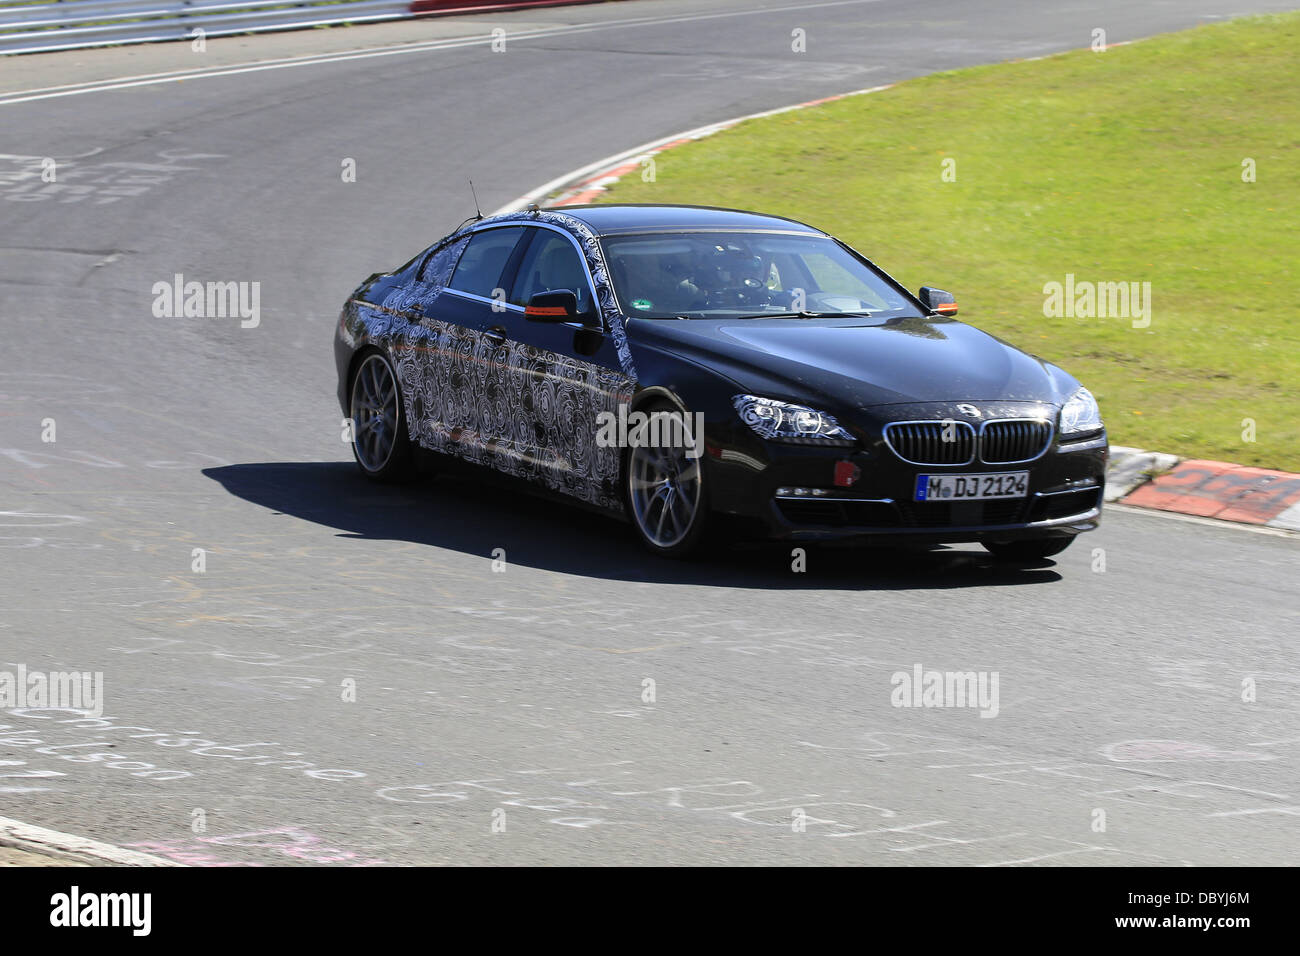 Preview 'spy shots' of the BMW 6 series GT being driven around the famous Nurburgring motorsport track in Nürburg, Germany.  Germany - 2012, Stock Photo